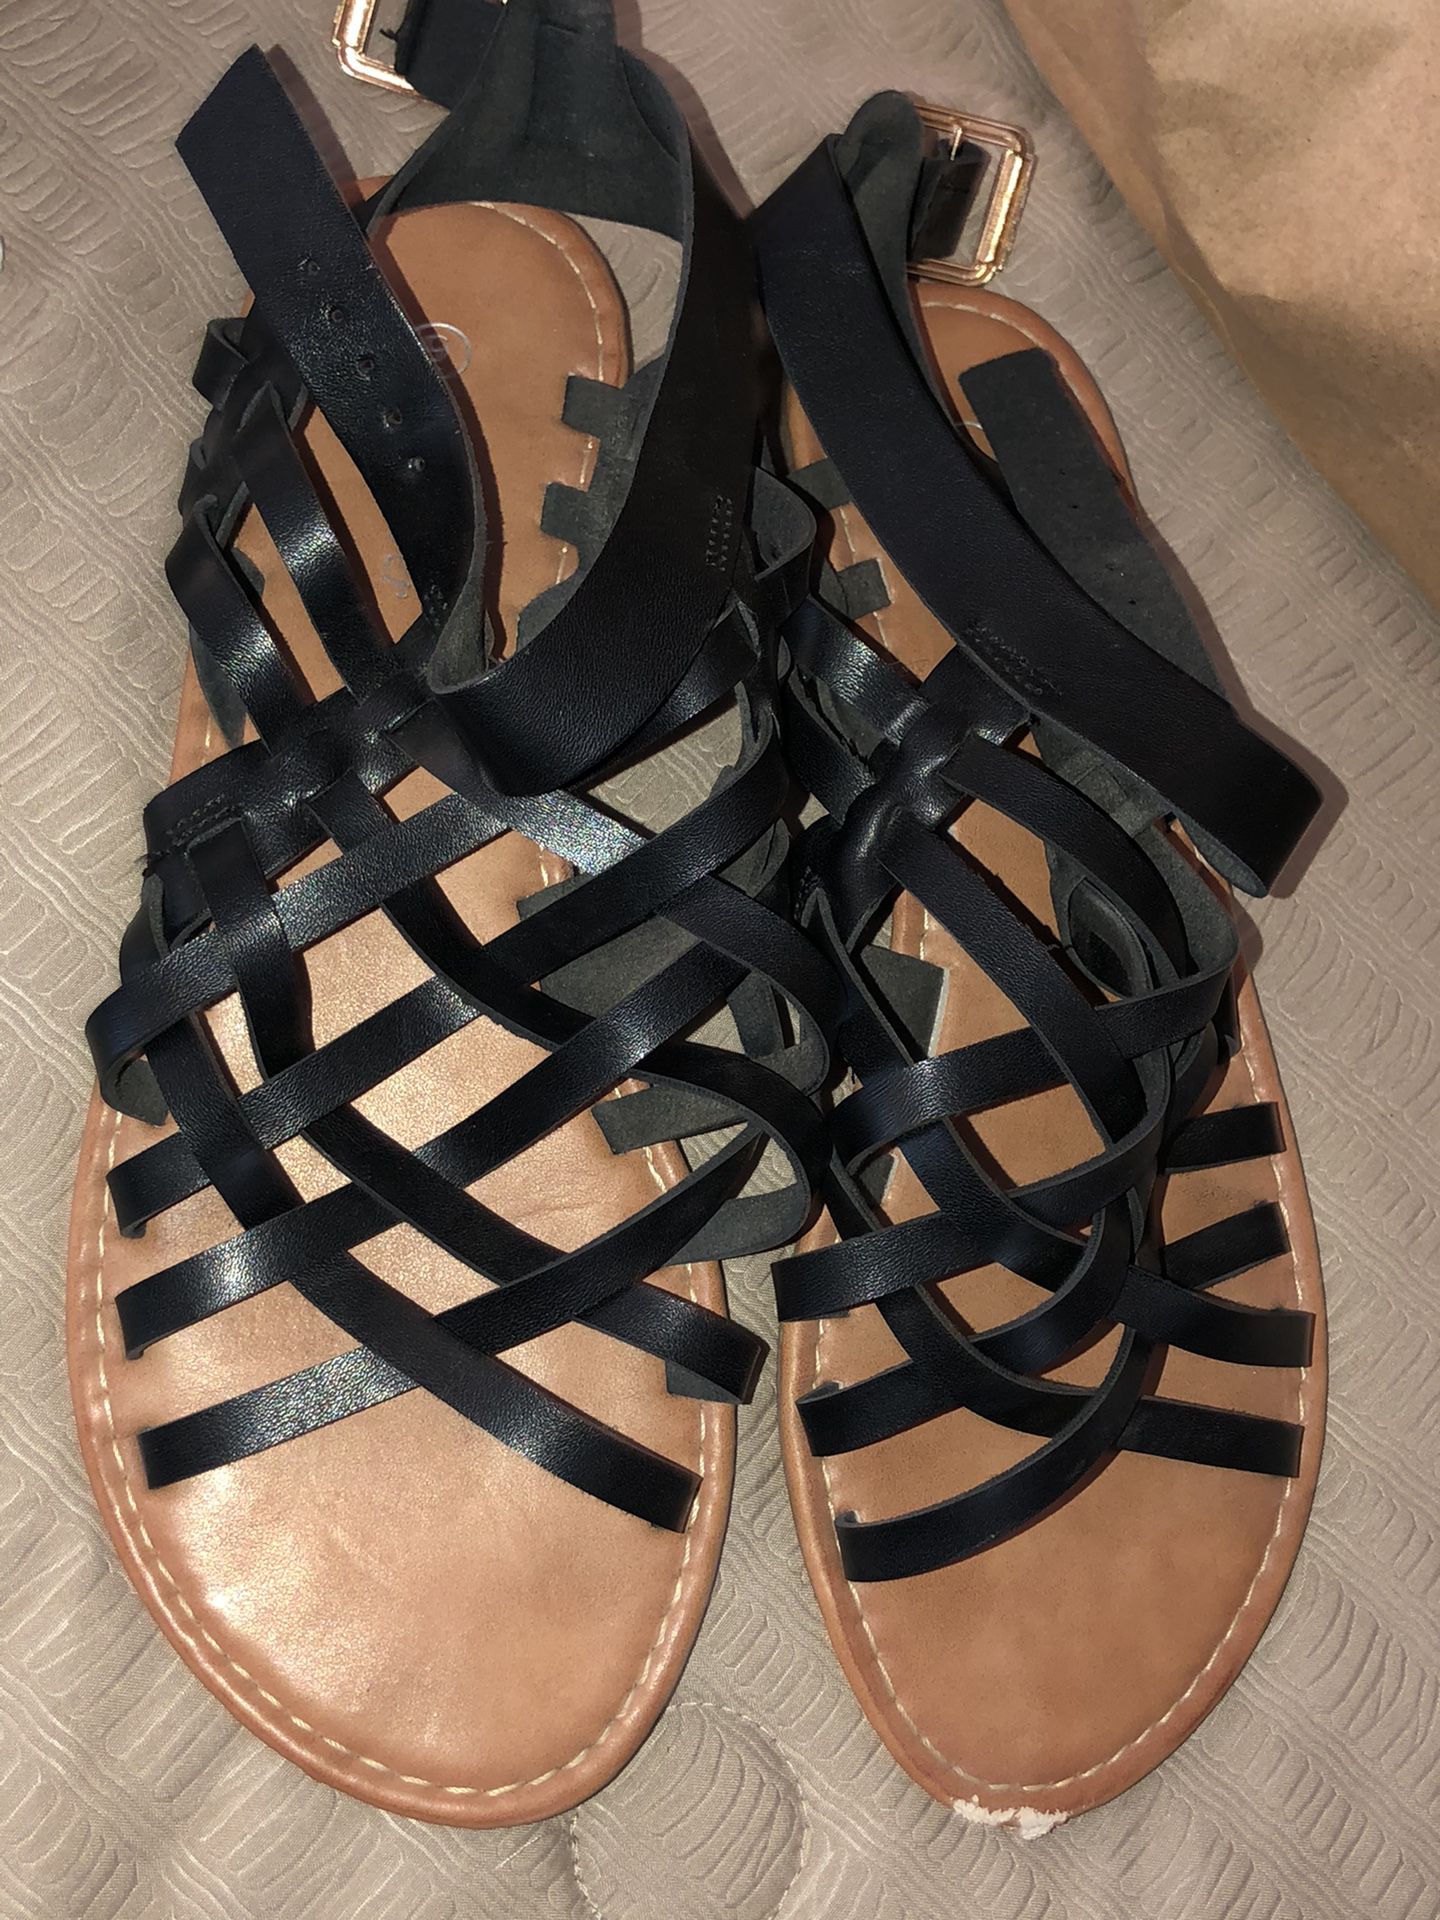 Free sandals size 9